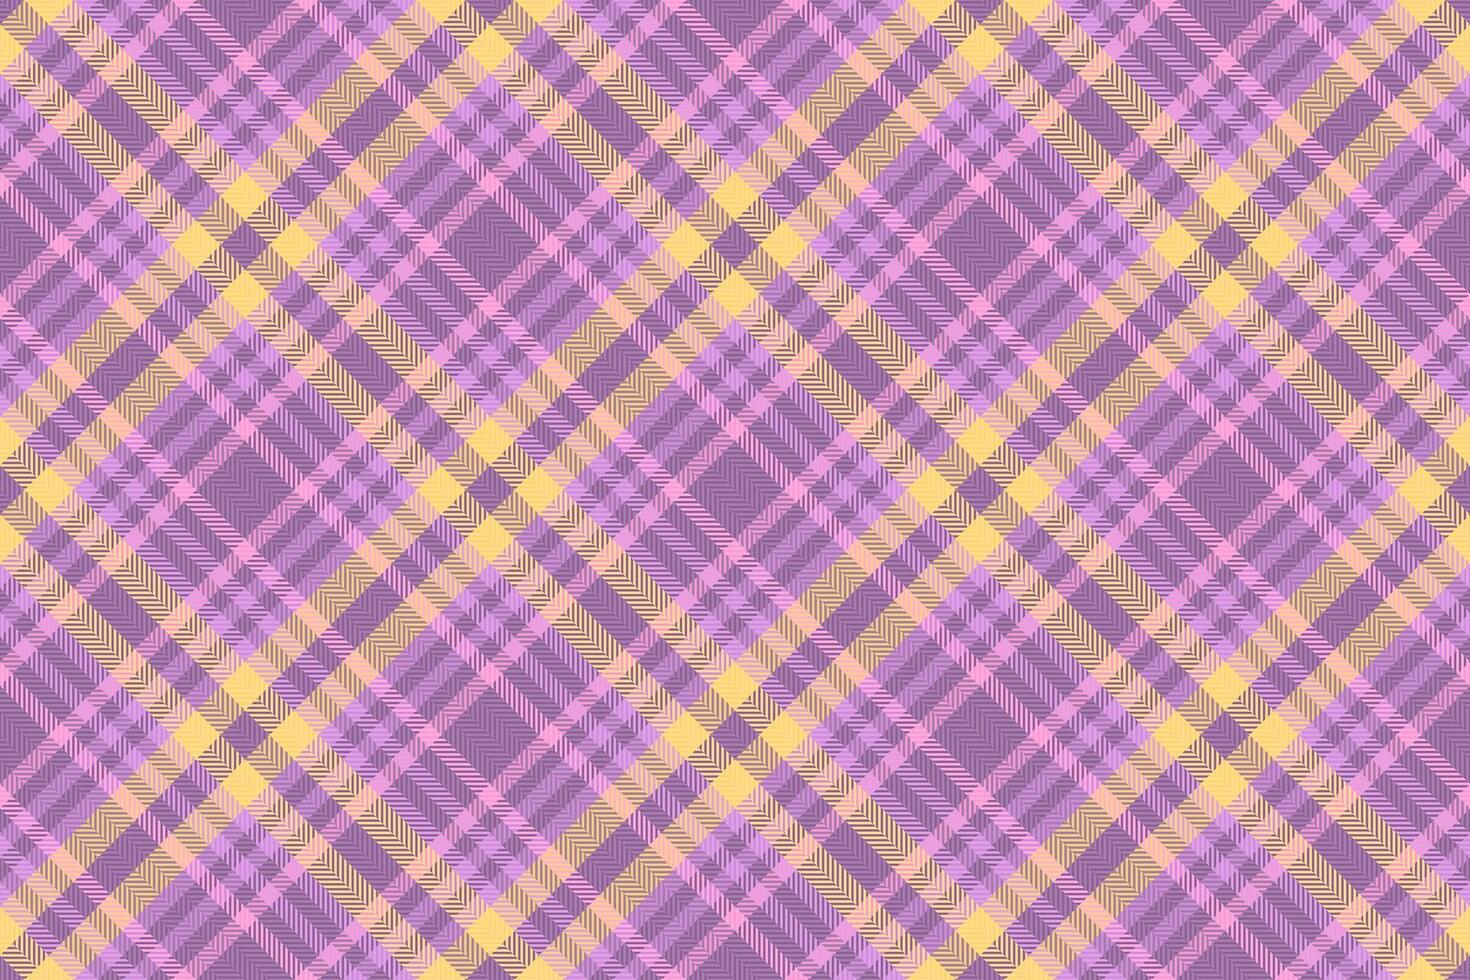 Anniversary fabric pattern, layered check textile texture. Bandana background seamless tartan plaid in purple and pastel colors. vector